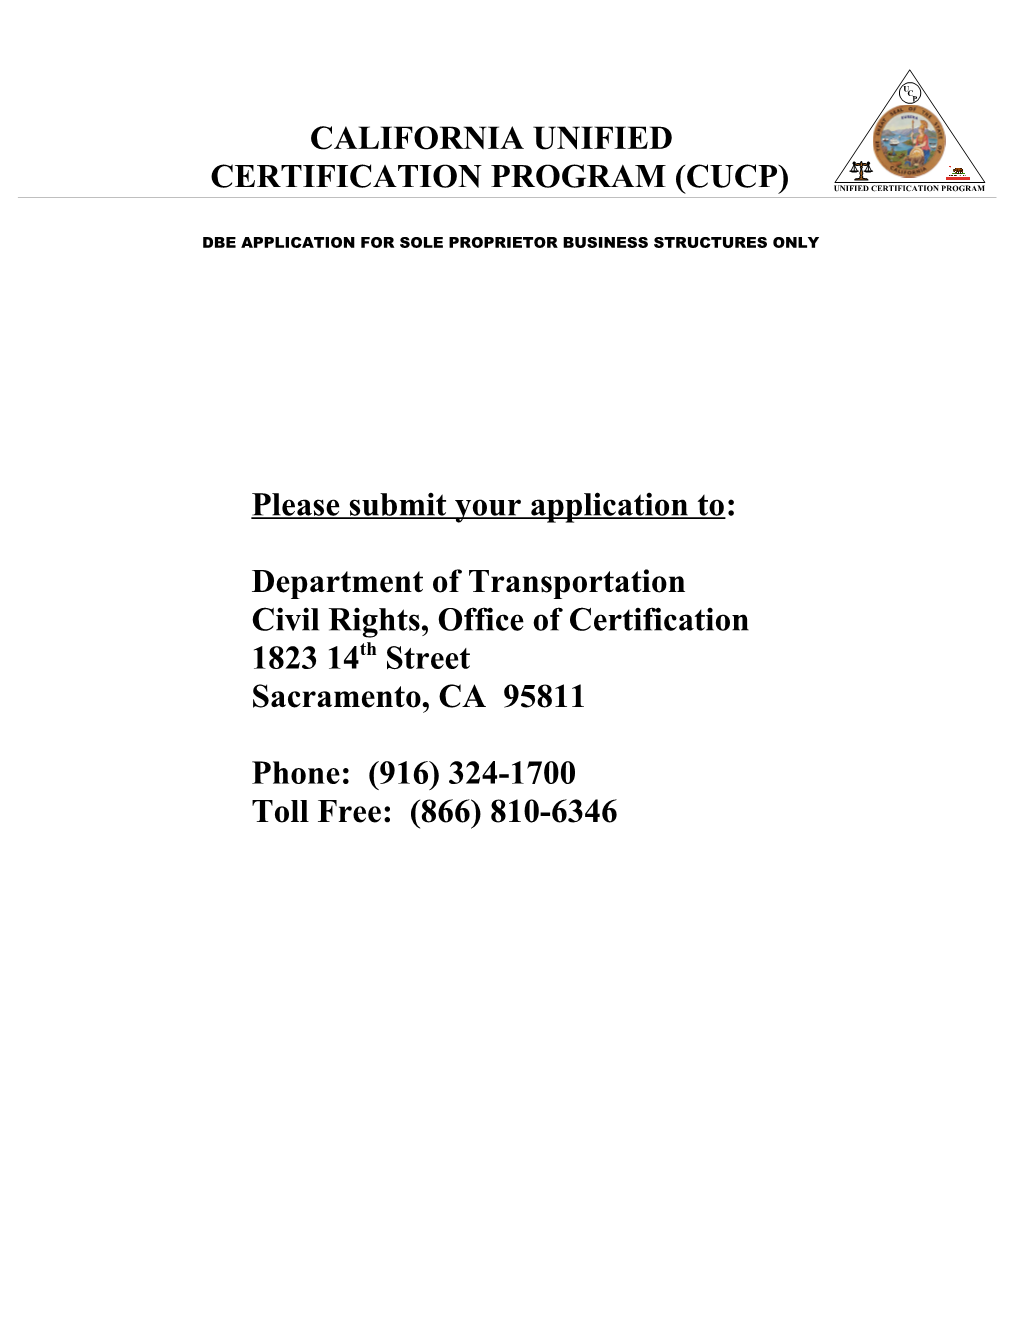 Dbe Application for Sole Proprietor Business Structures Only